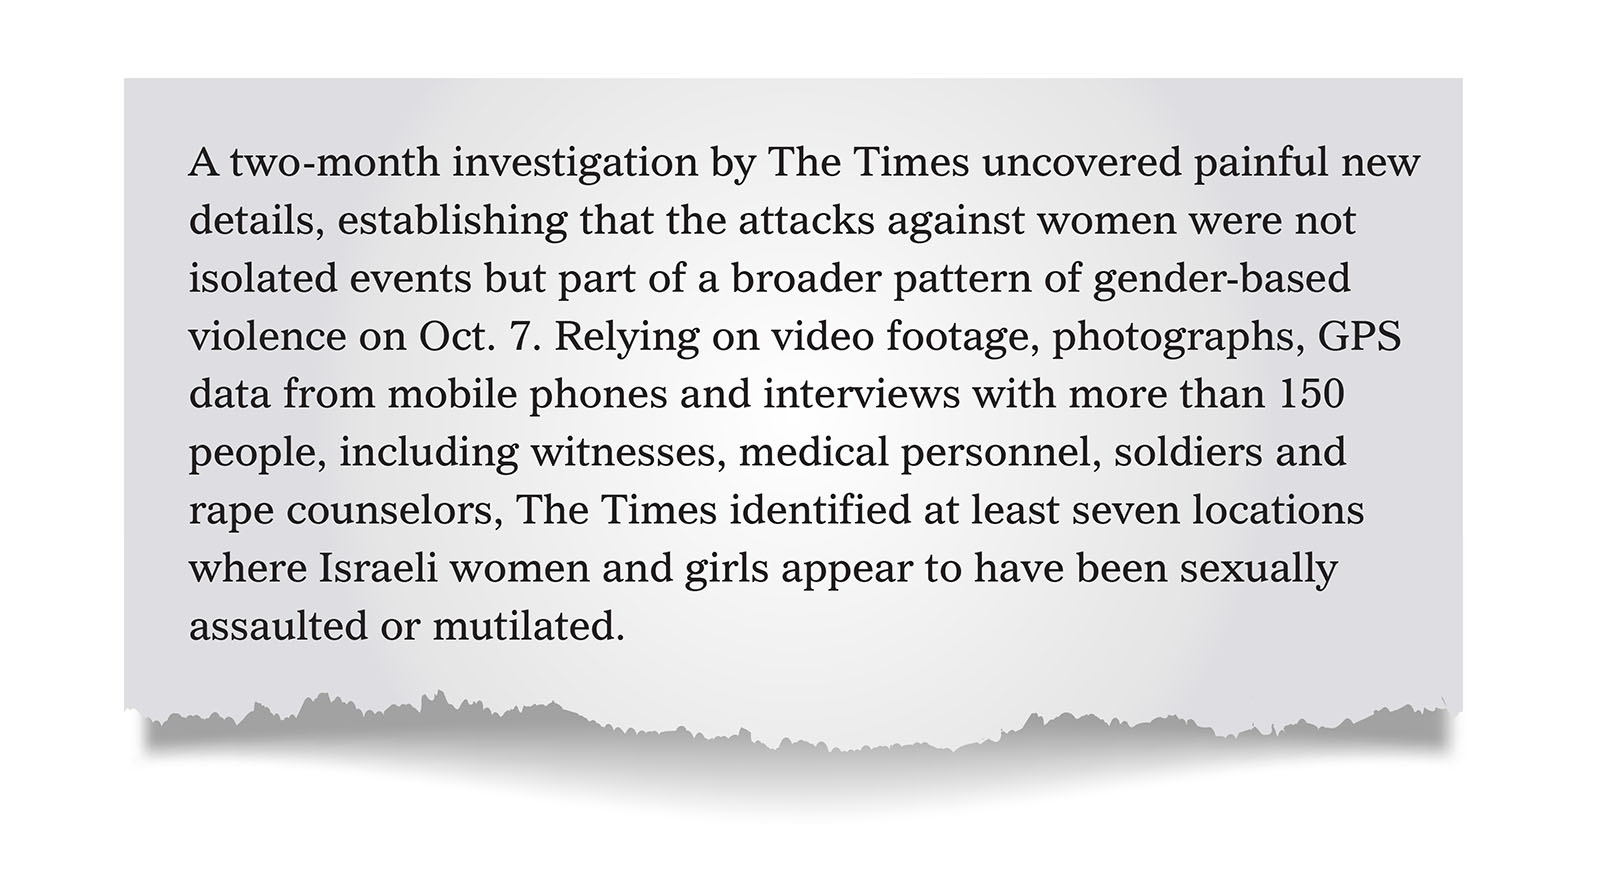 Pull quote: A two-month investigation by The Times uncovered painful new details, establishing that the attacks against women were not isolated events but part of a broader pattern of gender-based violence on Oct. 7. Relying on video footage, photographs, GPS data from mobile phones and interviews with more than 150 people, including witnesses, medical personnel, soldiers and rape counselors, The Times identified at least seven locations where Israeli women and girls appear to have been sexually assaulted or mutilated.